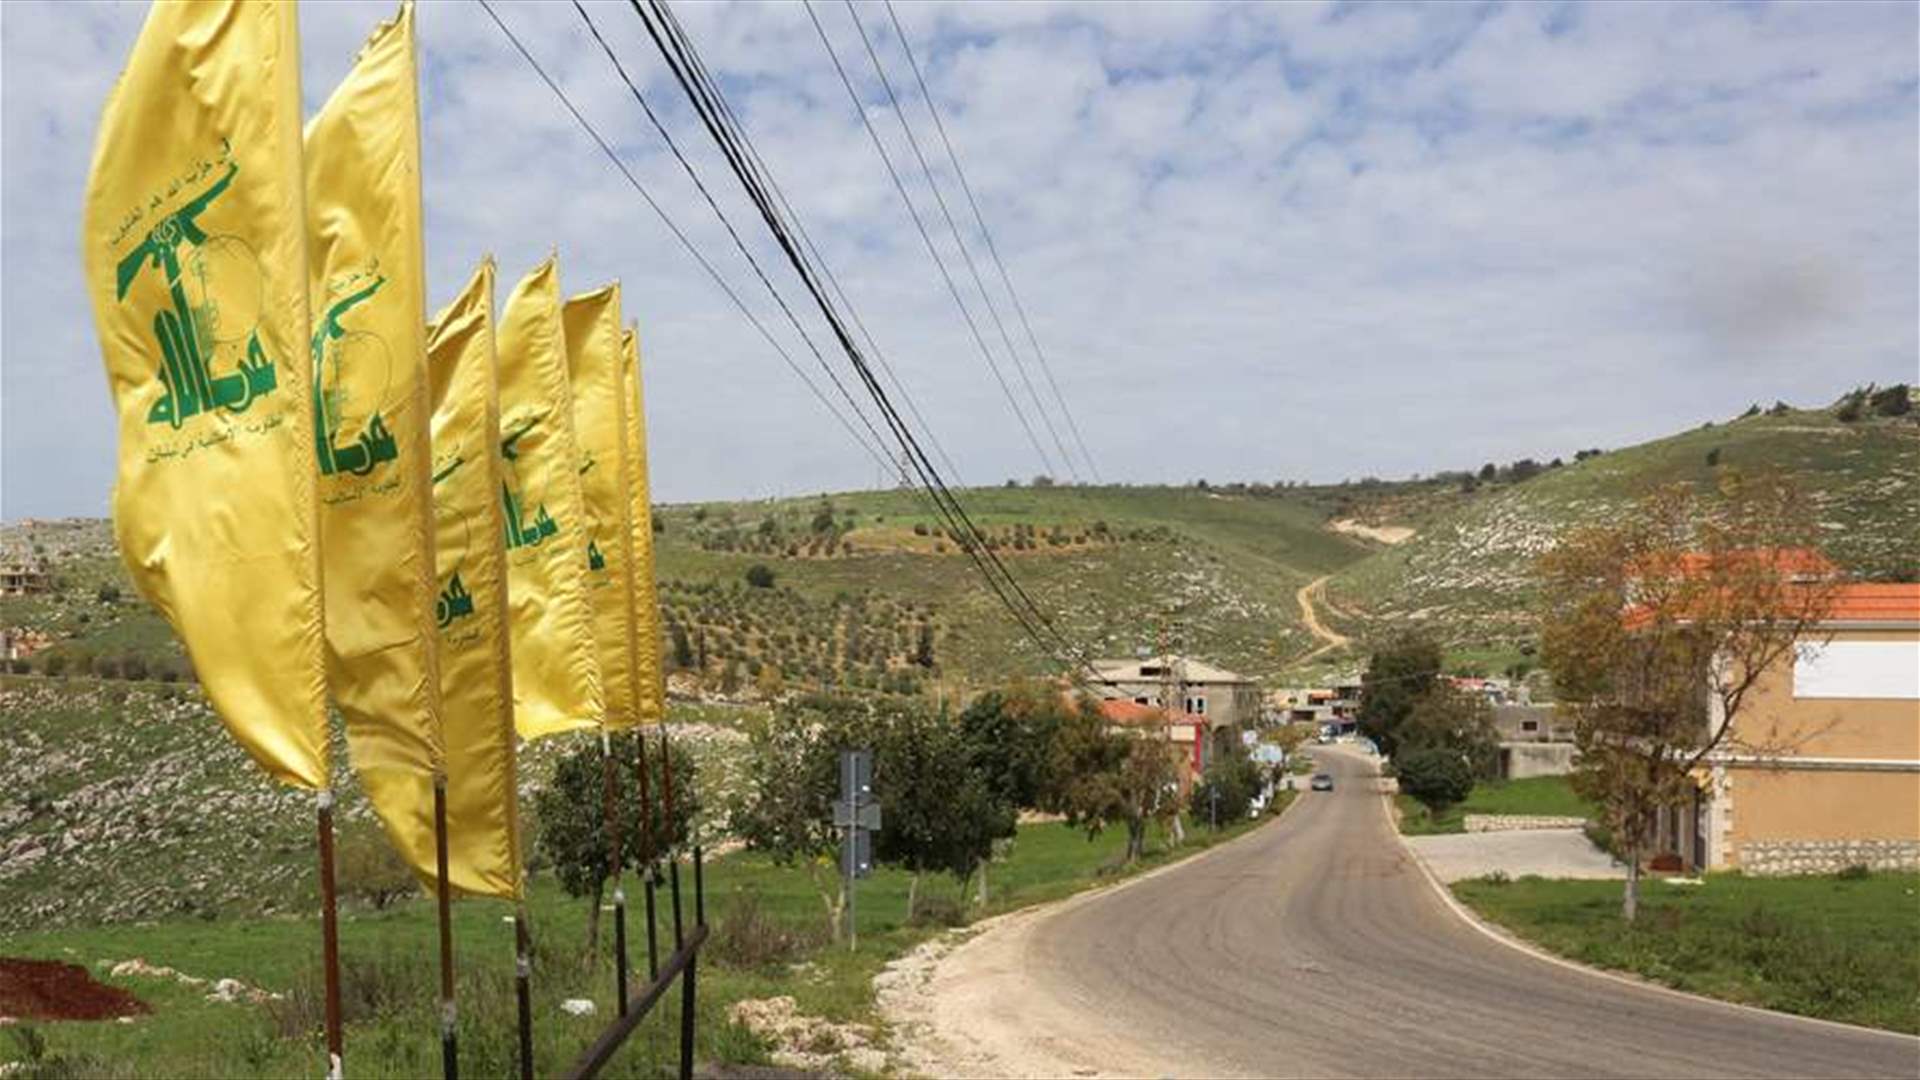 Israeli forces targeted: Hezbollah declares series of operations in multiple key locations